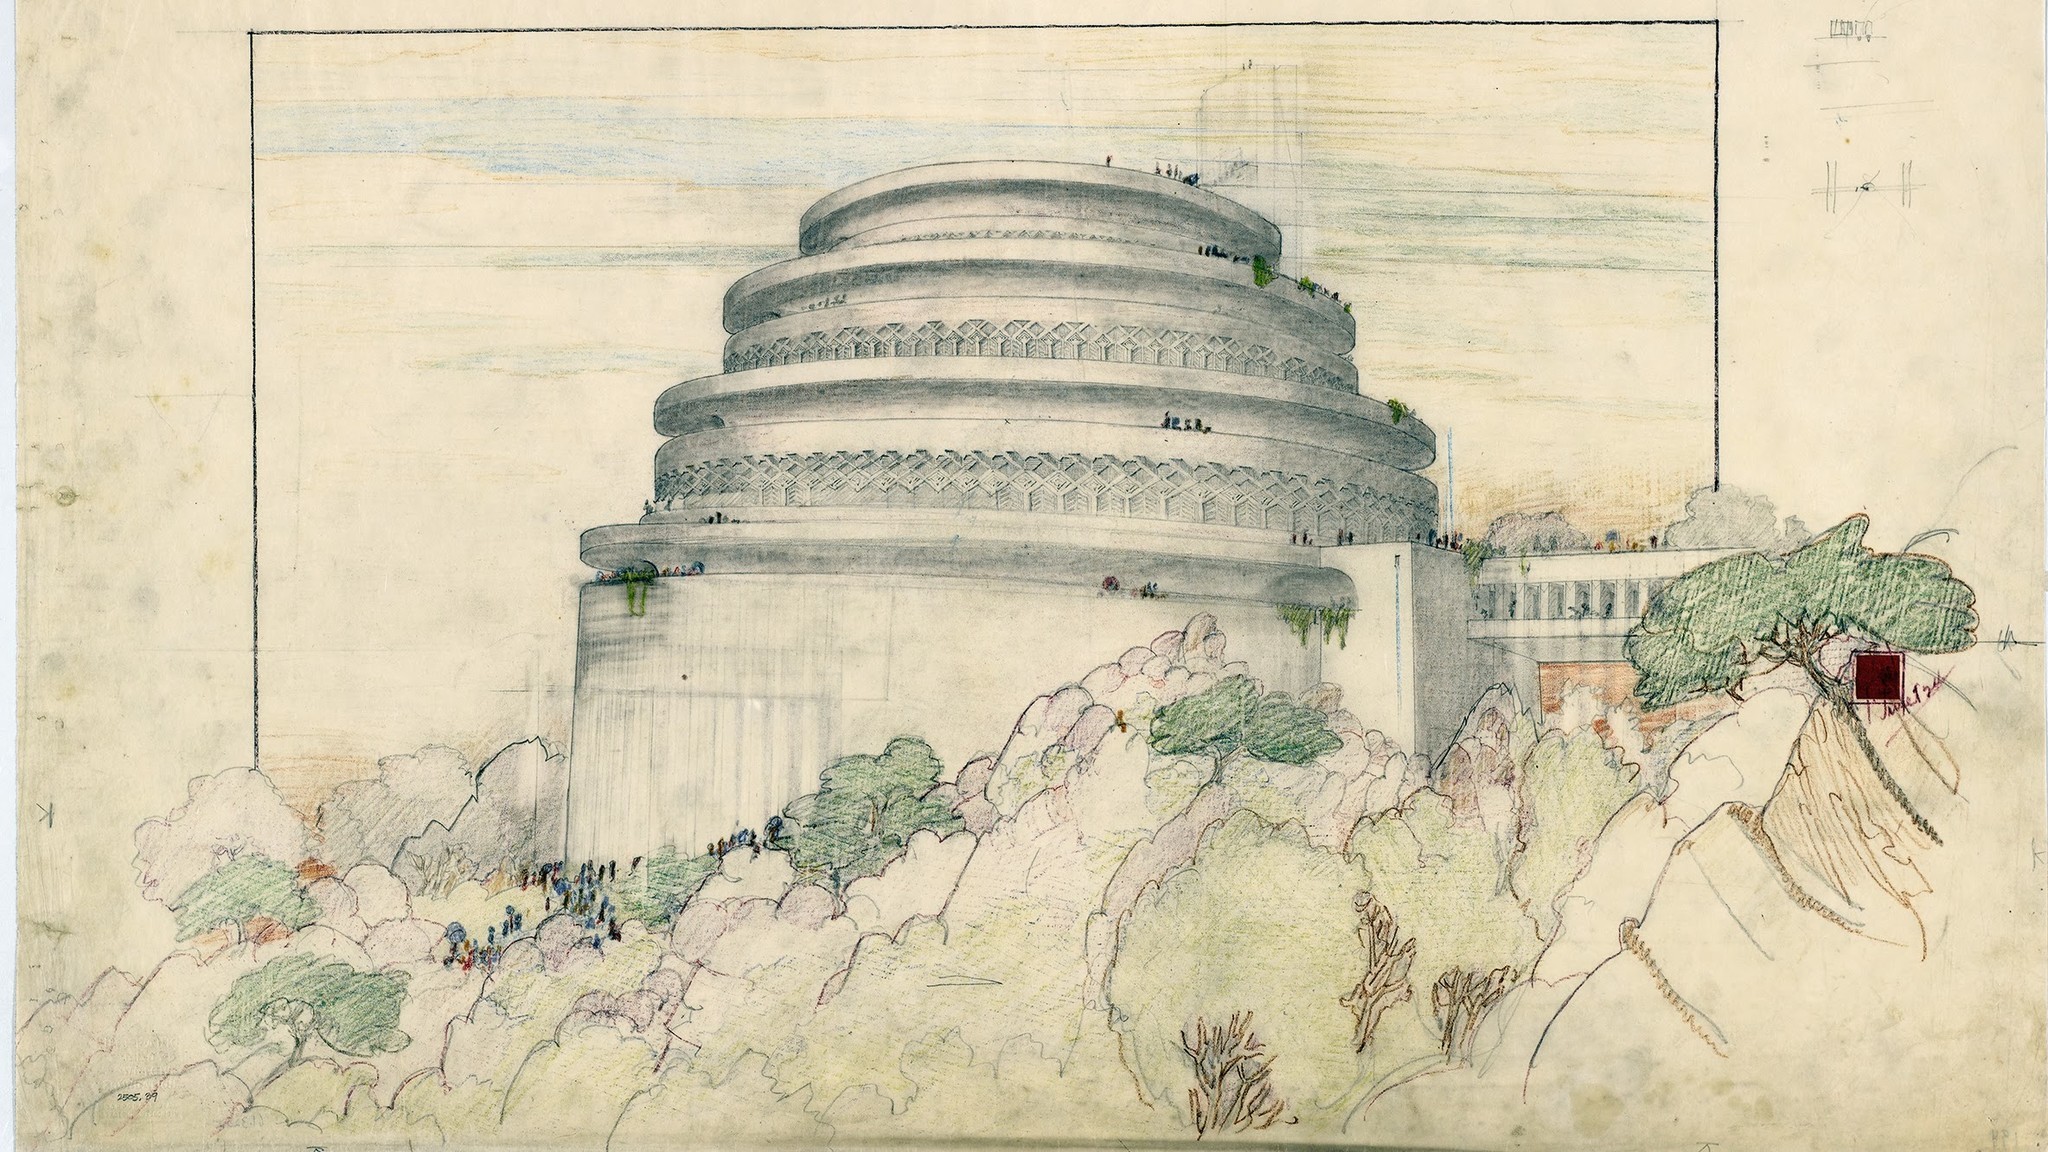 Only about half of Frank Lloyd Wright's designs were built. This drawing was for a scenic overlook and planetarium atop Maryland's Sugarloaf Mountain, a 1920s project that was never built. The drawing is part of the exhibit at New York's Metropolitan Museum of Art.